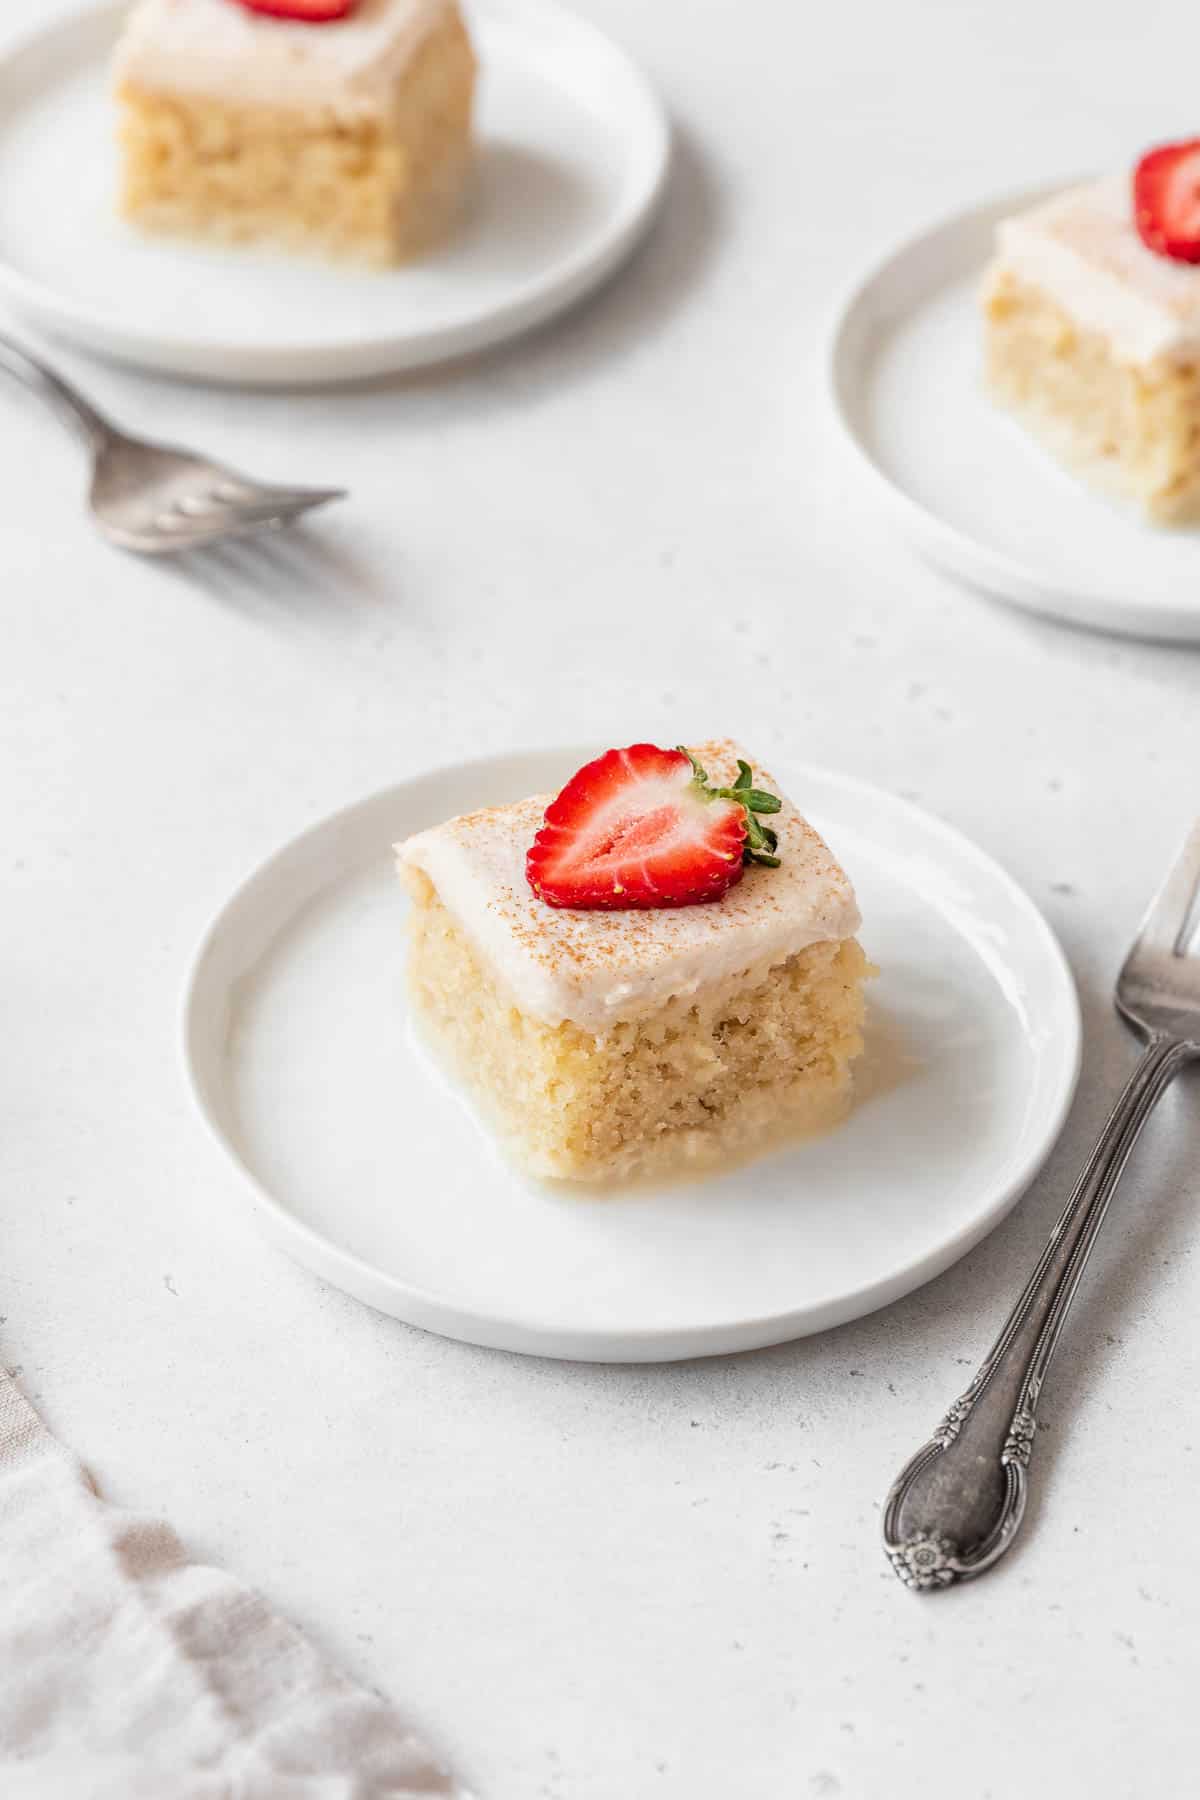 Three slices of gluten-free tres leches cake on white dessert plates with strawberries.